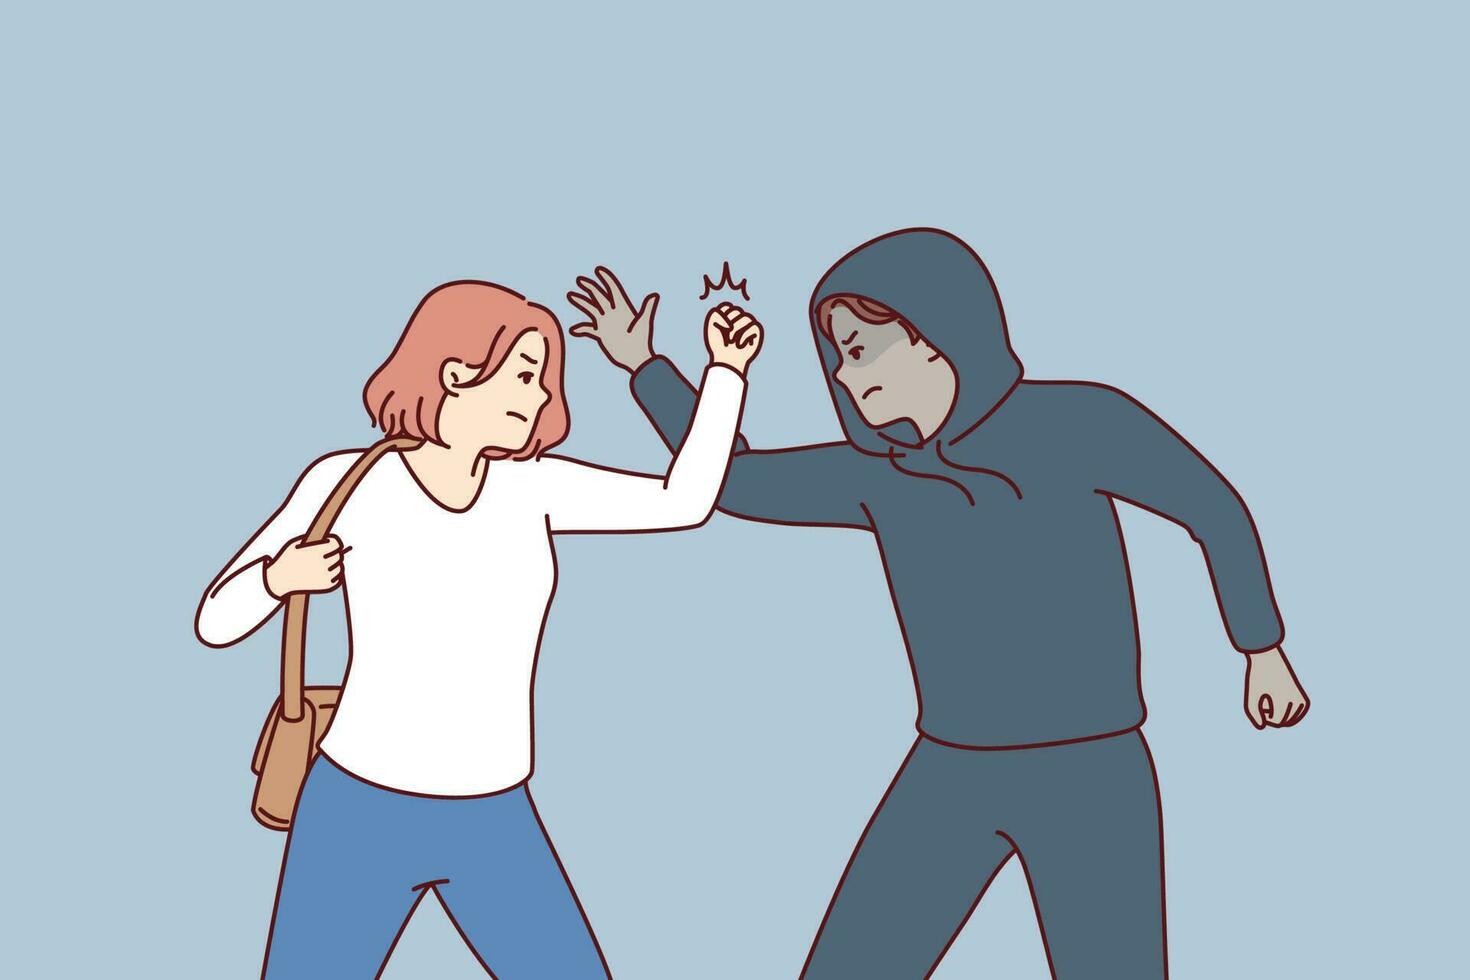 Strong woman fights back against thief by showing self-defense techniques to man who tried to steal purse and commit crime. Self-defense and martial art concept of krav maga against street thug vector